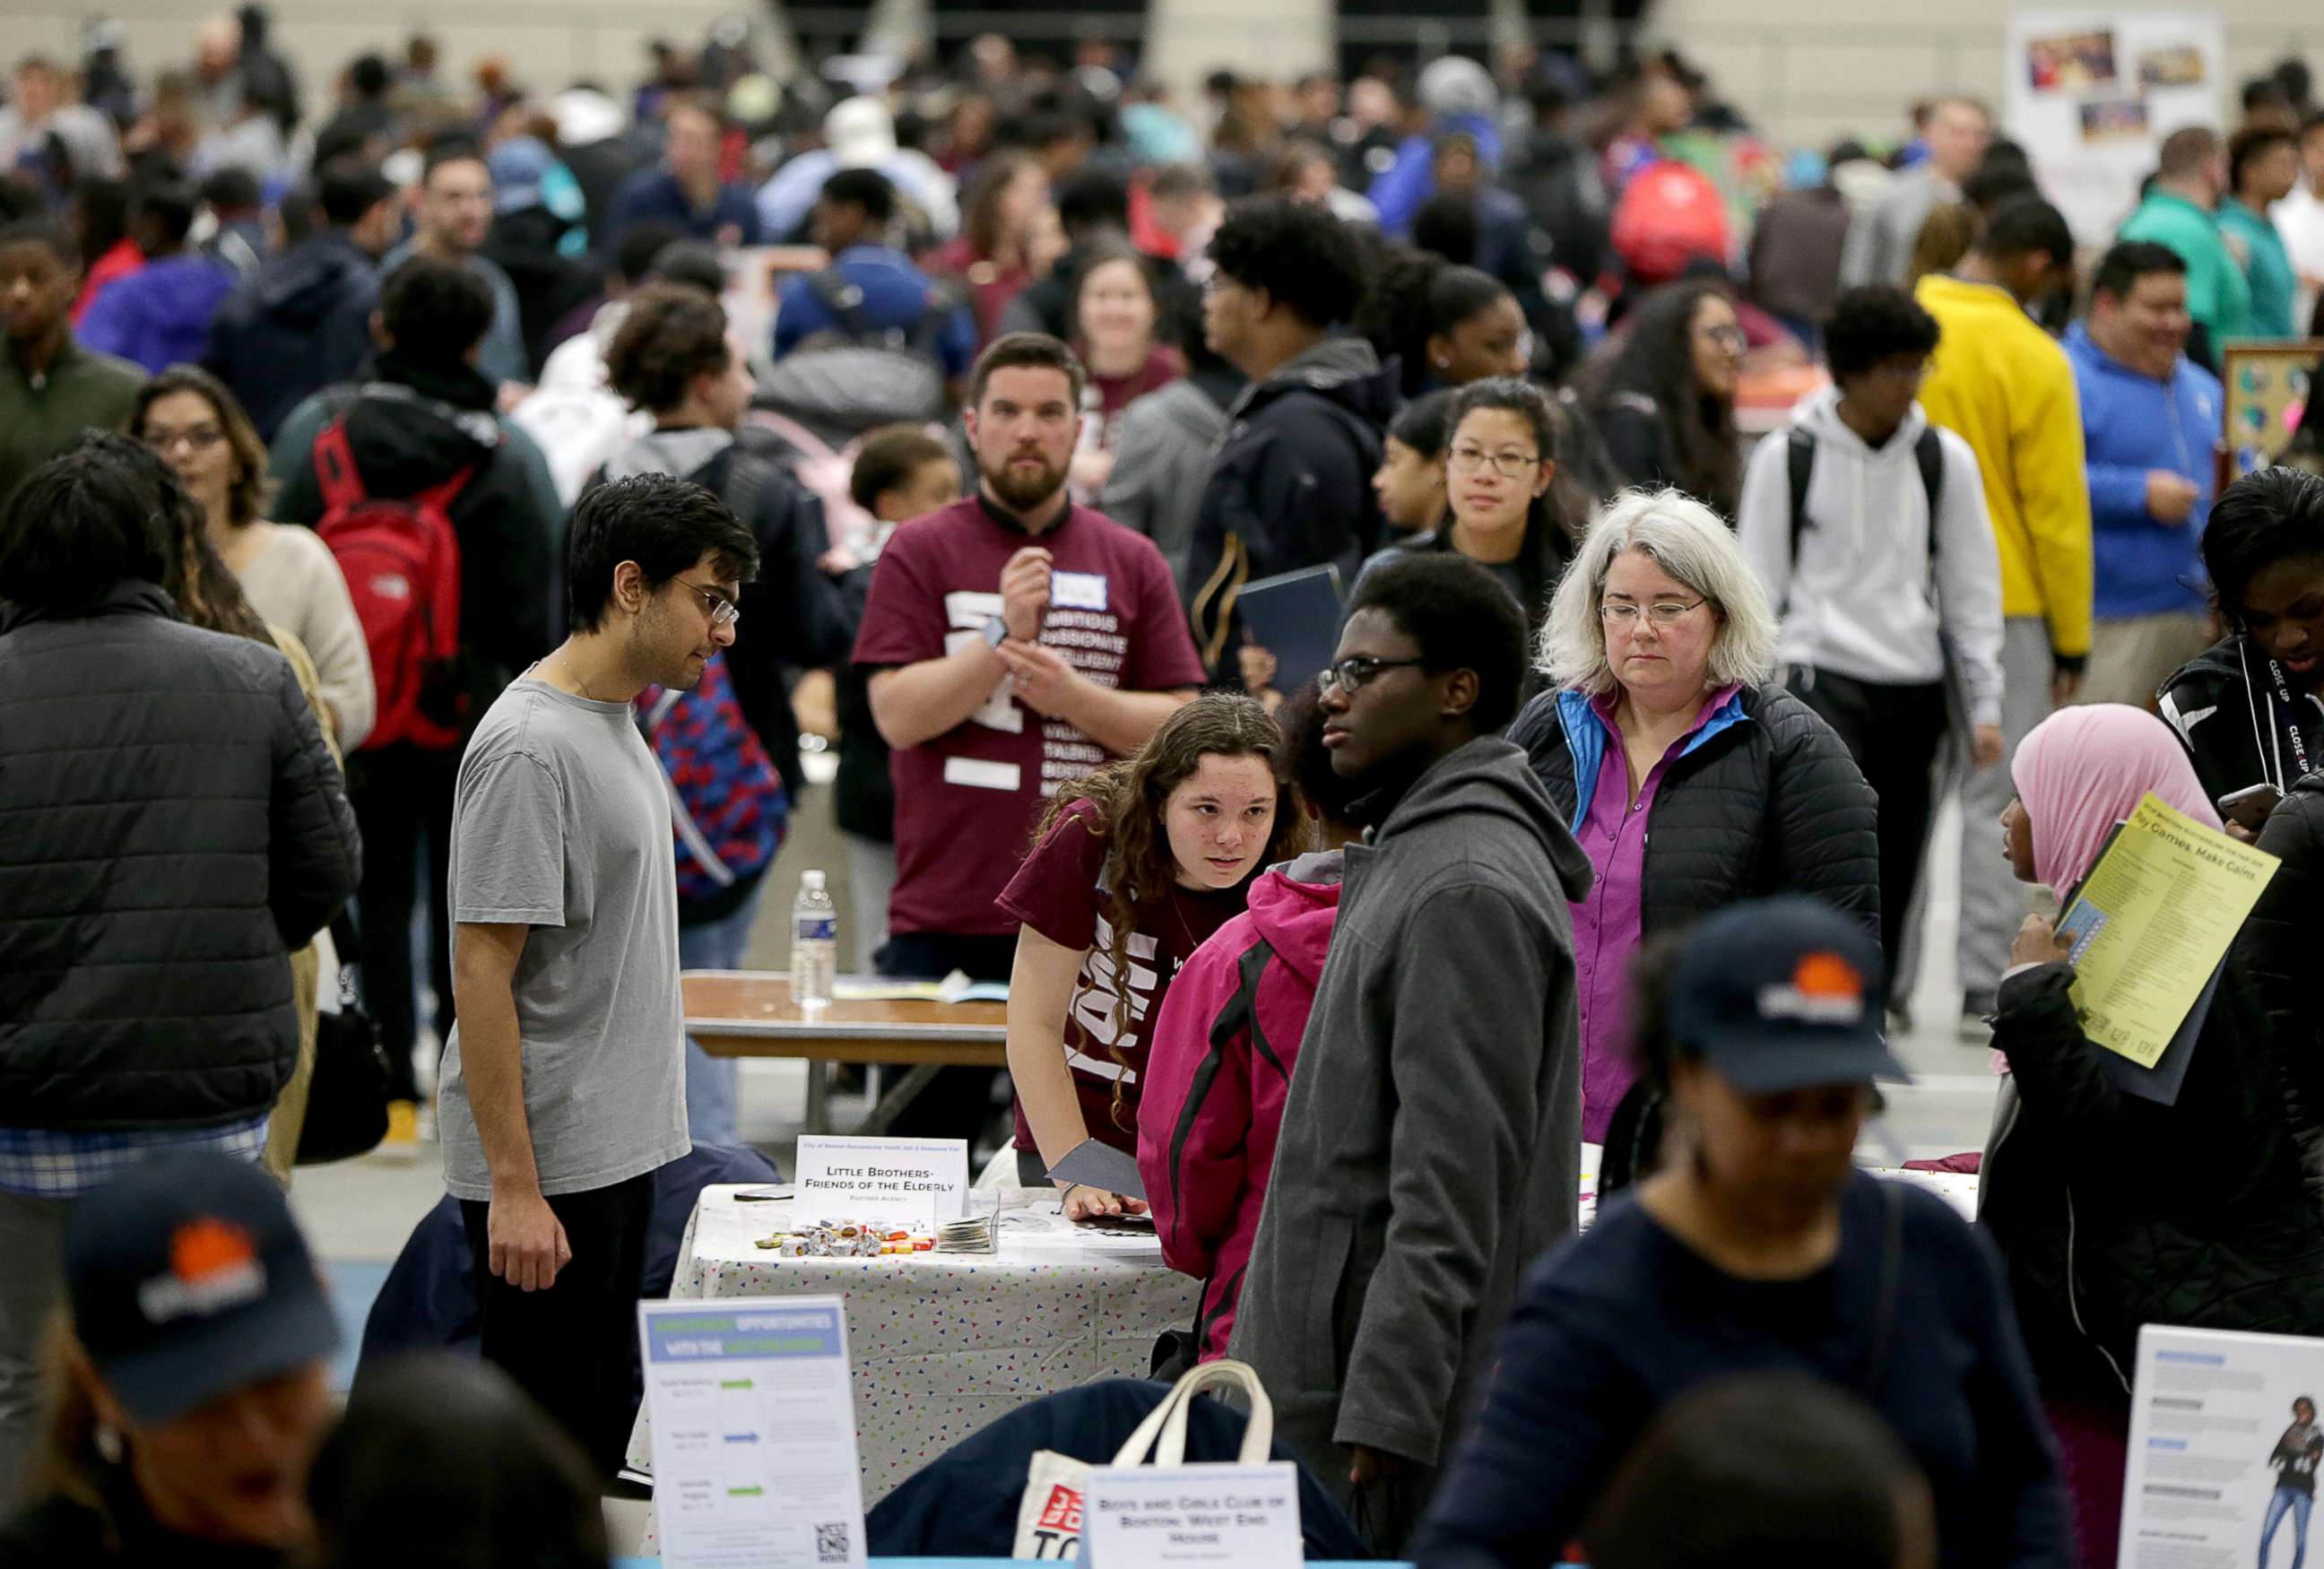 PHOTO: People attend a youth job and resource fair at the Reggie Lewis Track and Athletic Center in the Roxbury neighborhood of Boston, March 10, 2018.